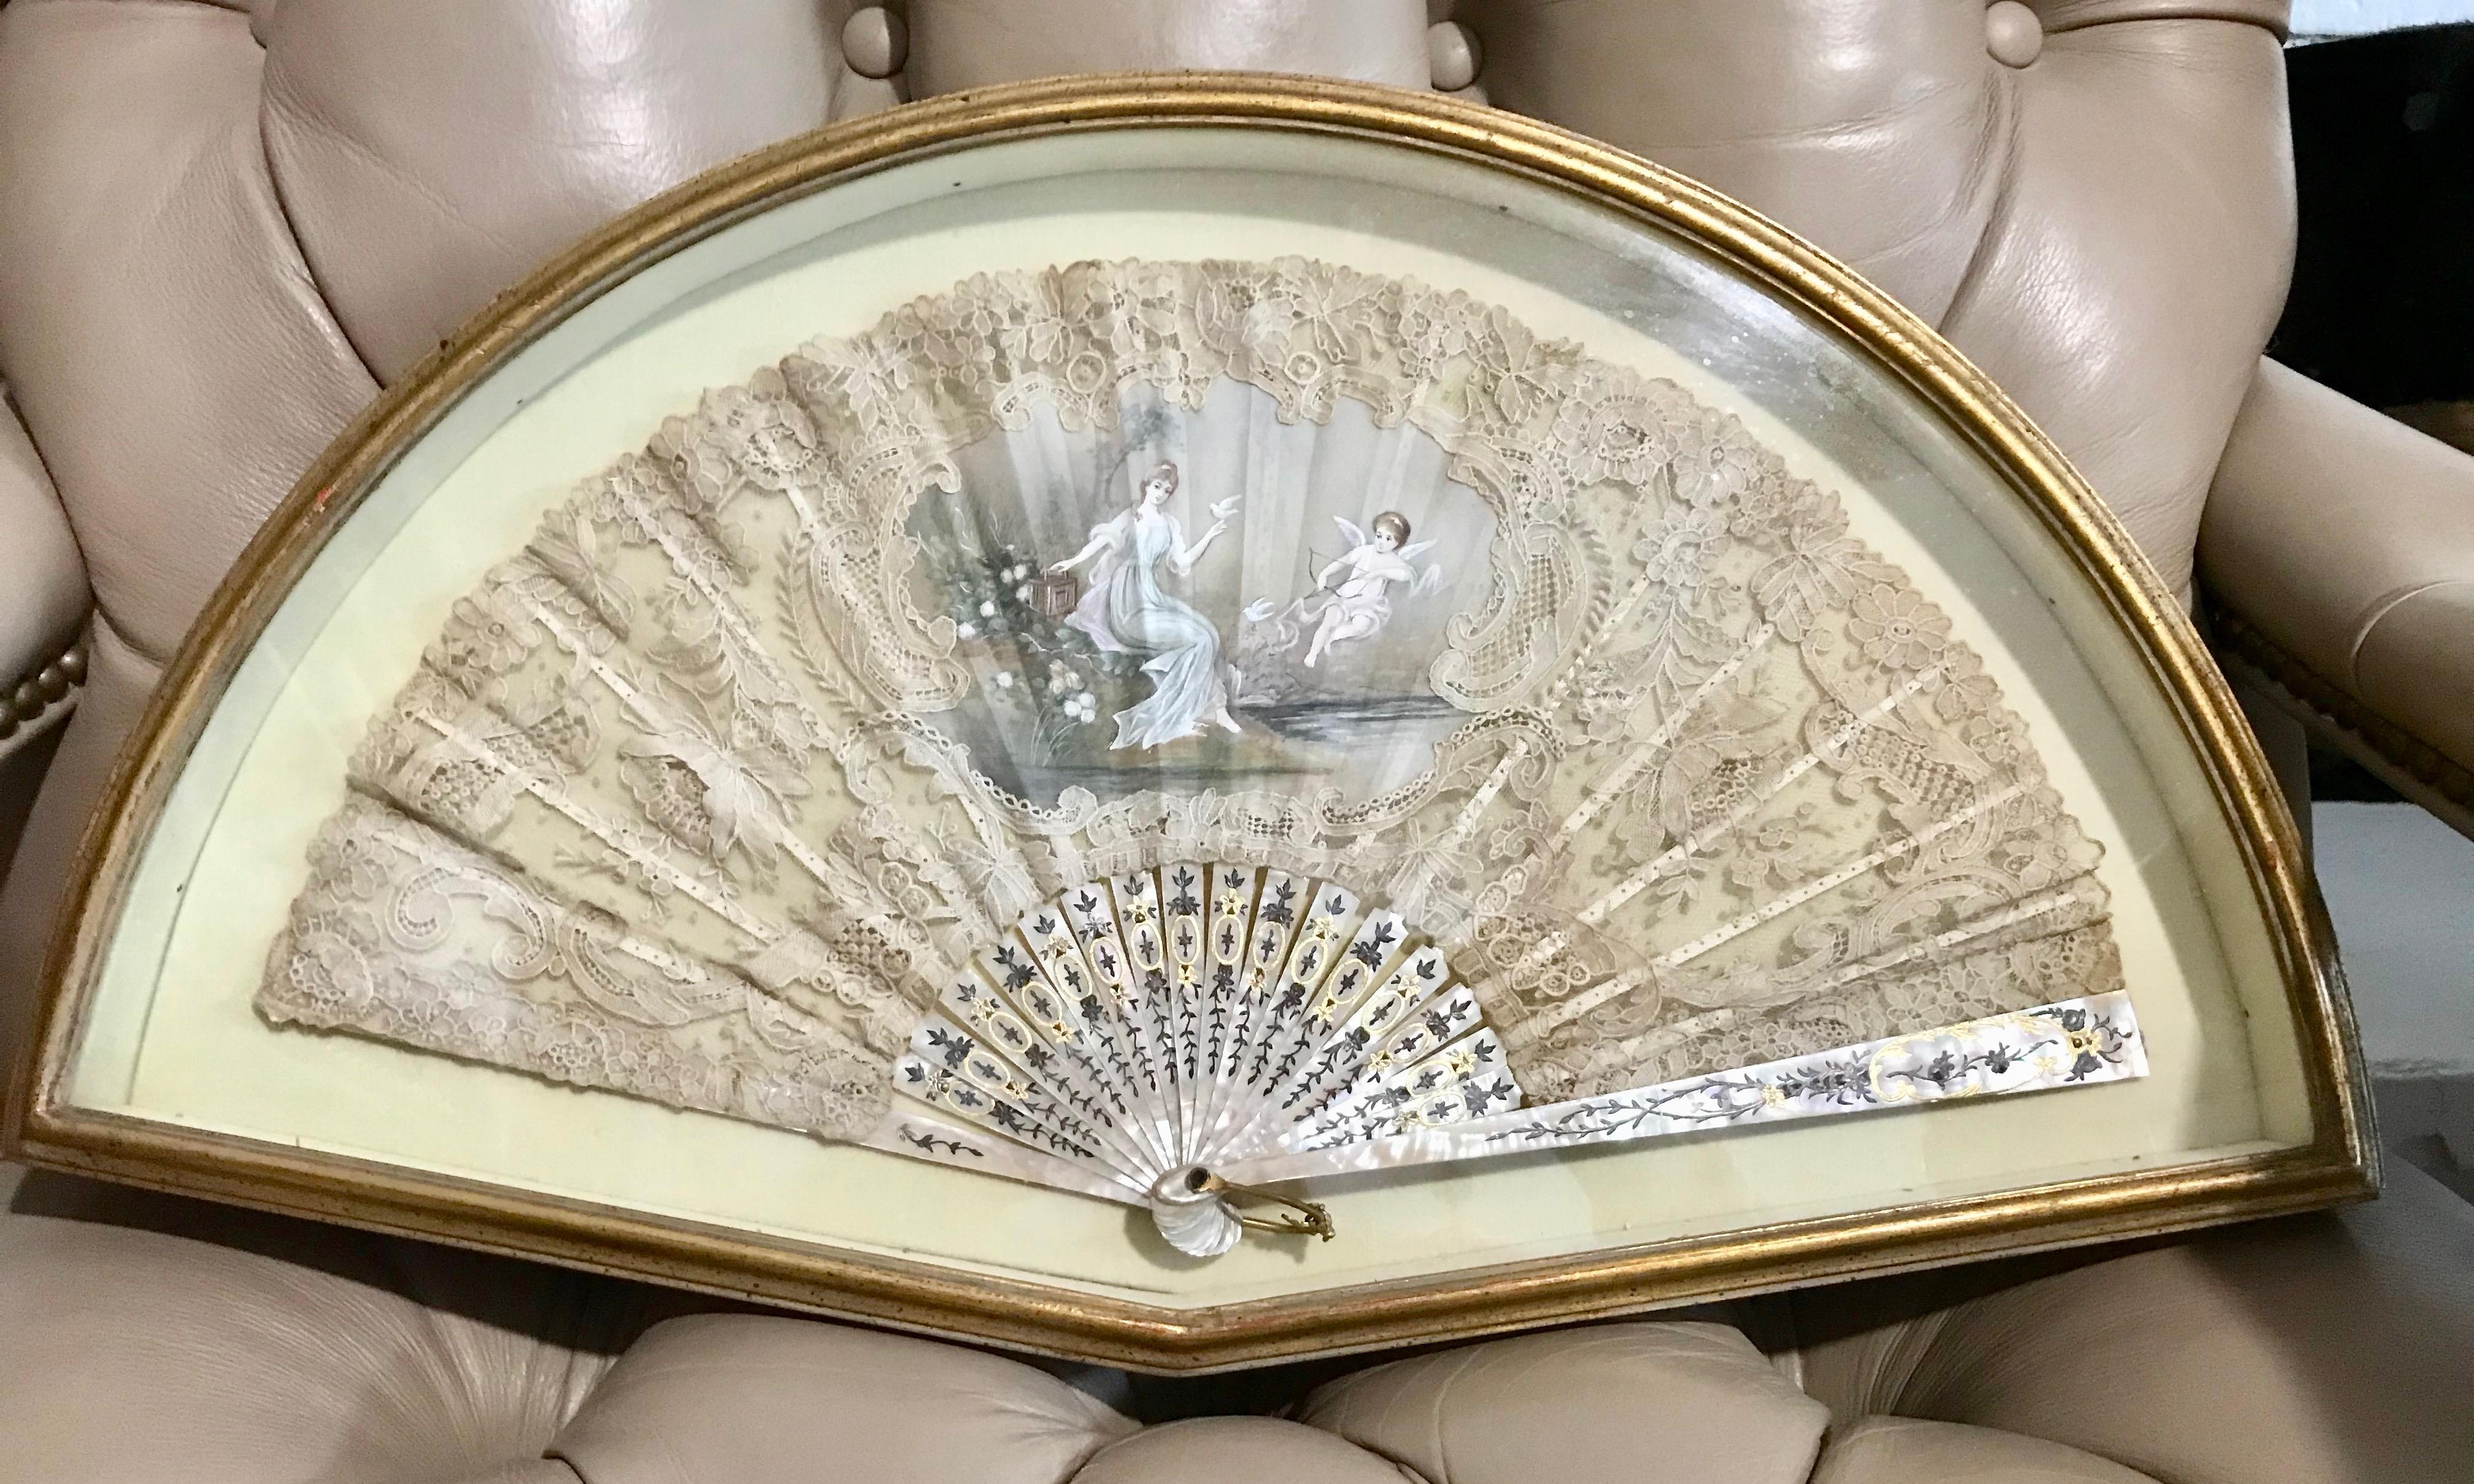 Fabulous quality with exquisitely delicate lace work accented with  a hand painted center panel of Venus and cupid. The stem mother-of-pearl 
framework is finely and dramatically decorated ( 18 pcs ).
The frame is mounted in a custom gold leaf